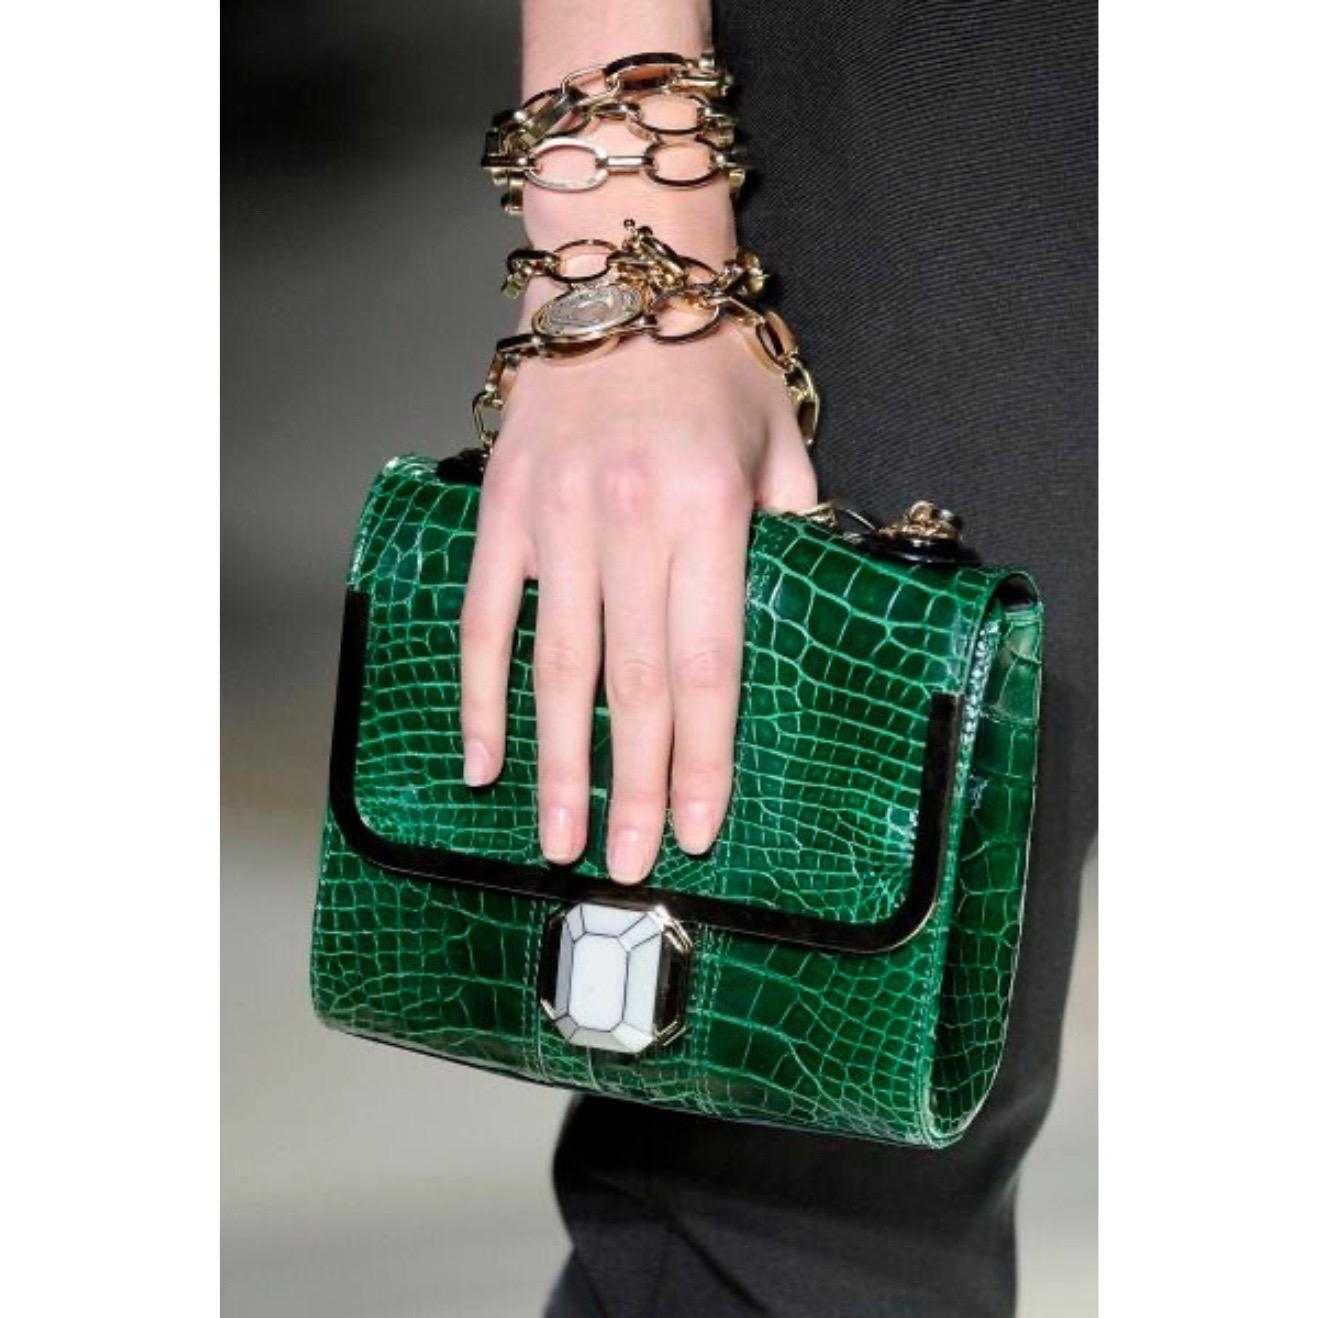 Lanvin Alber Elbaz Turquoise Red Crocodile Effect Woven Chain Bag Spring 2009 8